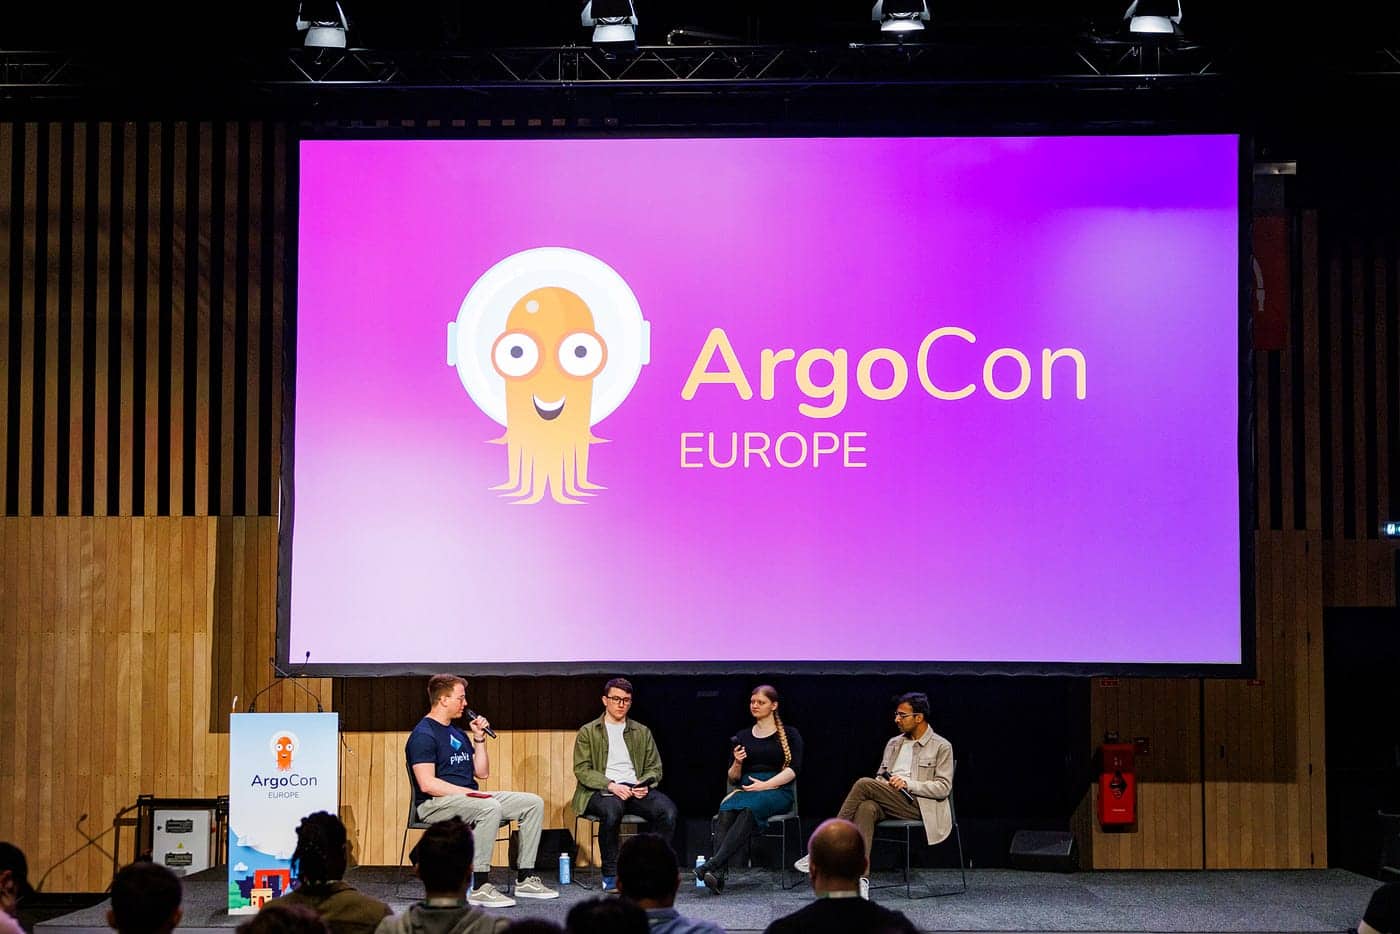 Four speakers on stage presenting ArgoCon Europe